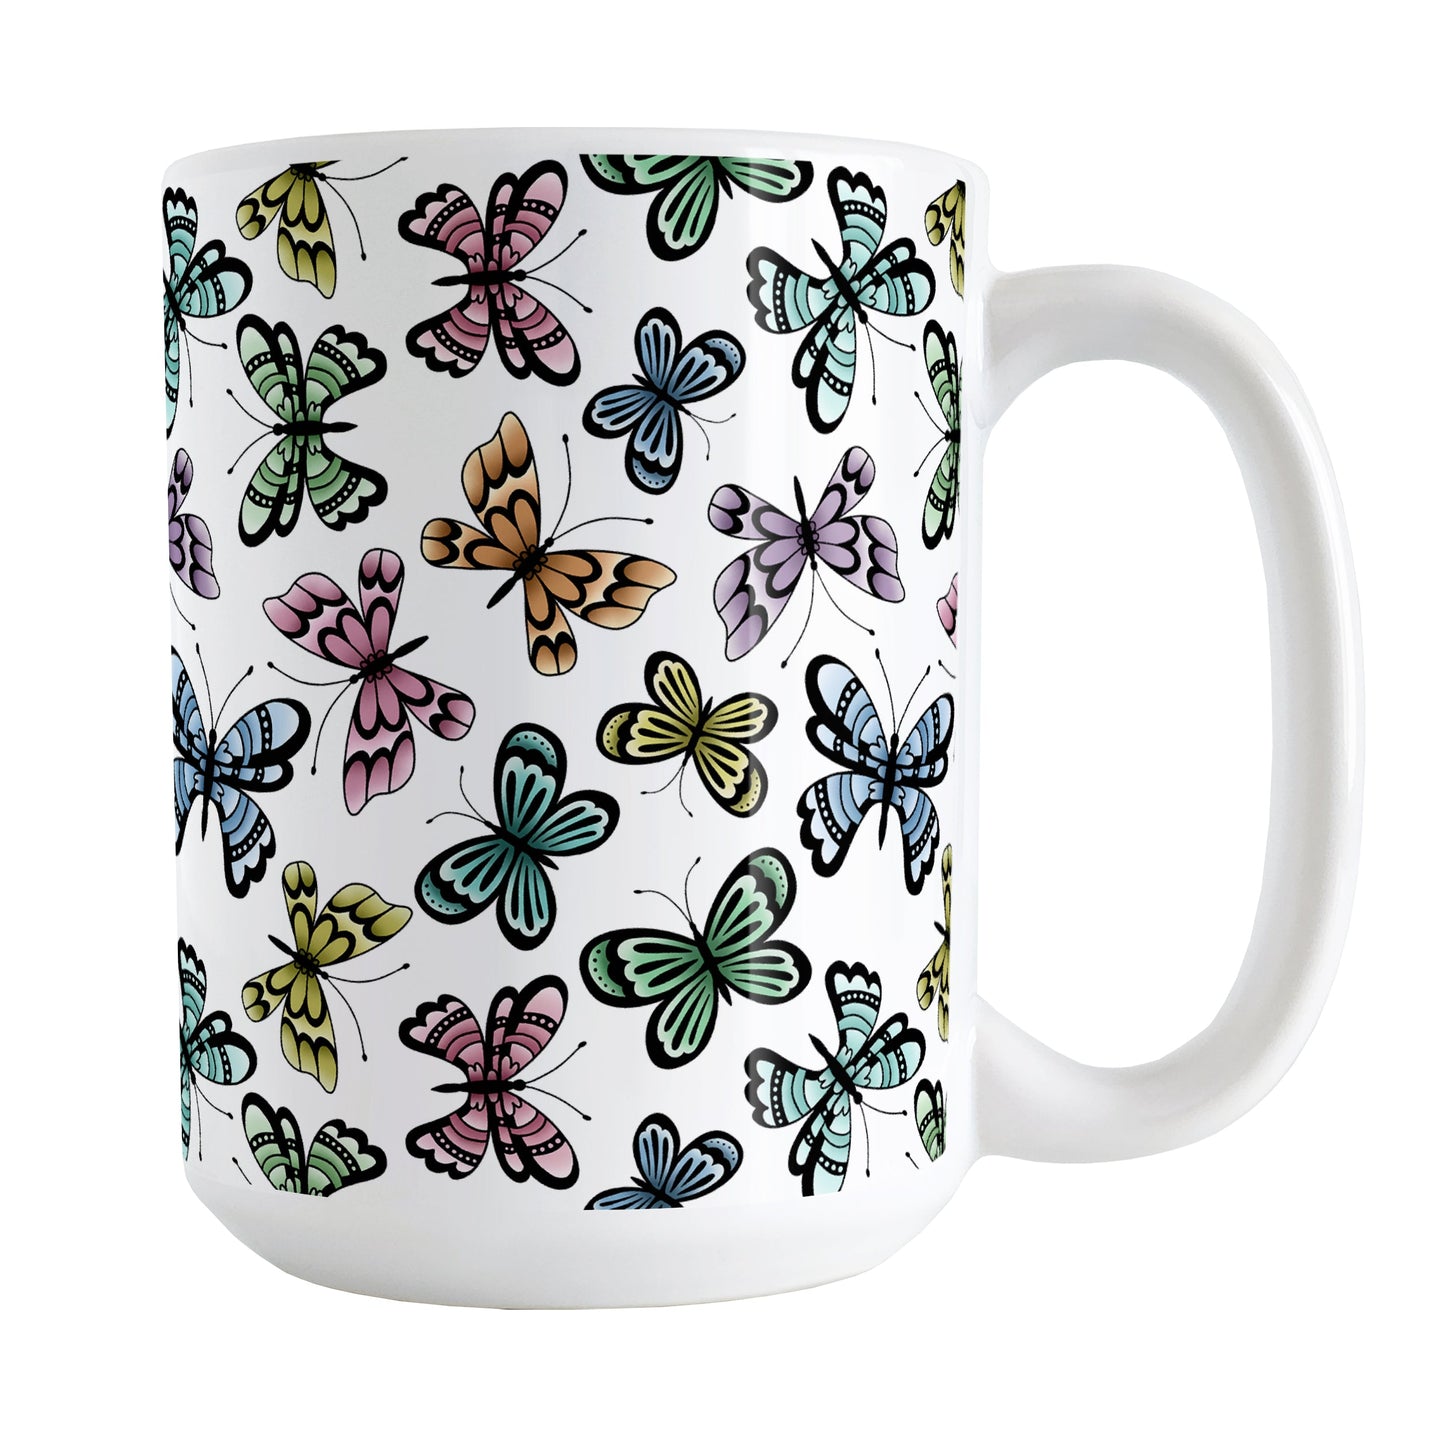 Pretty Butterfly Pattern Mug (15oz) at Amy's Coffee Mugs. A ceramic coffee mug designed with pretty and colorful butterflies in a pattern that wraps around the mug to the handle. This mug is perfect for people who love butterflies and colorful nature designs. 